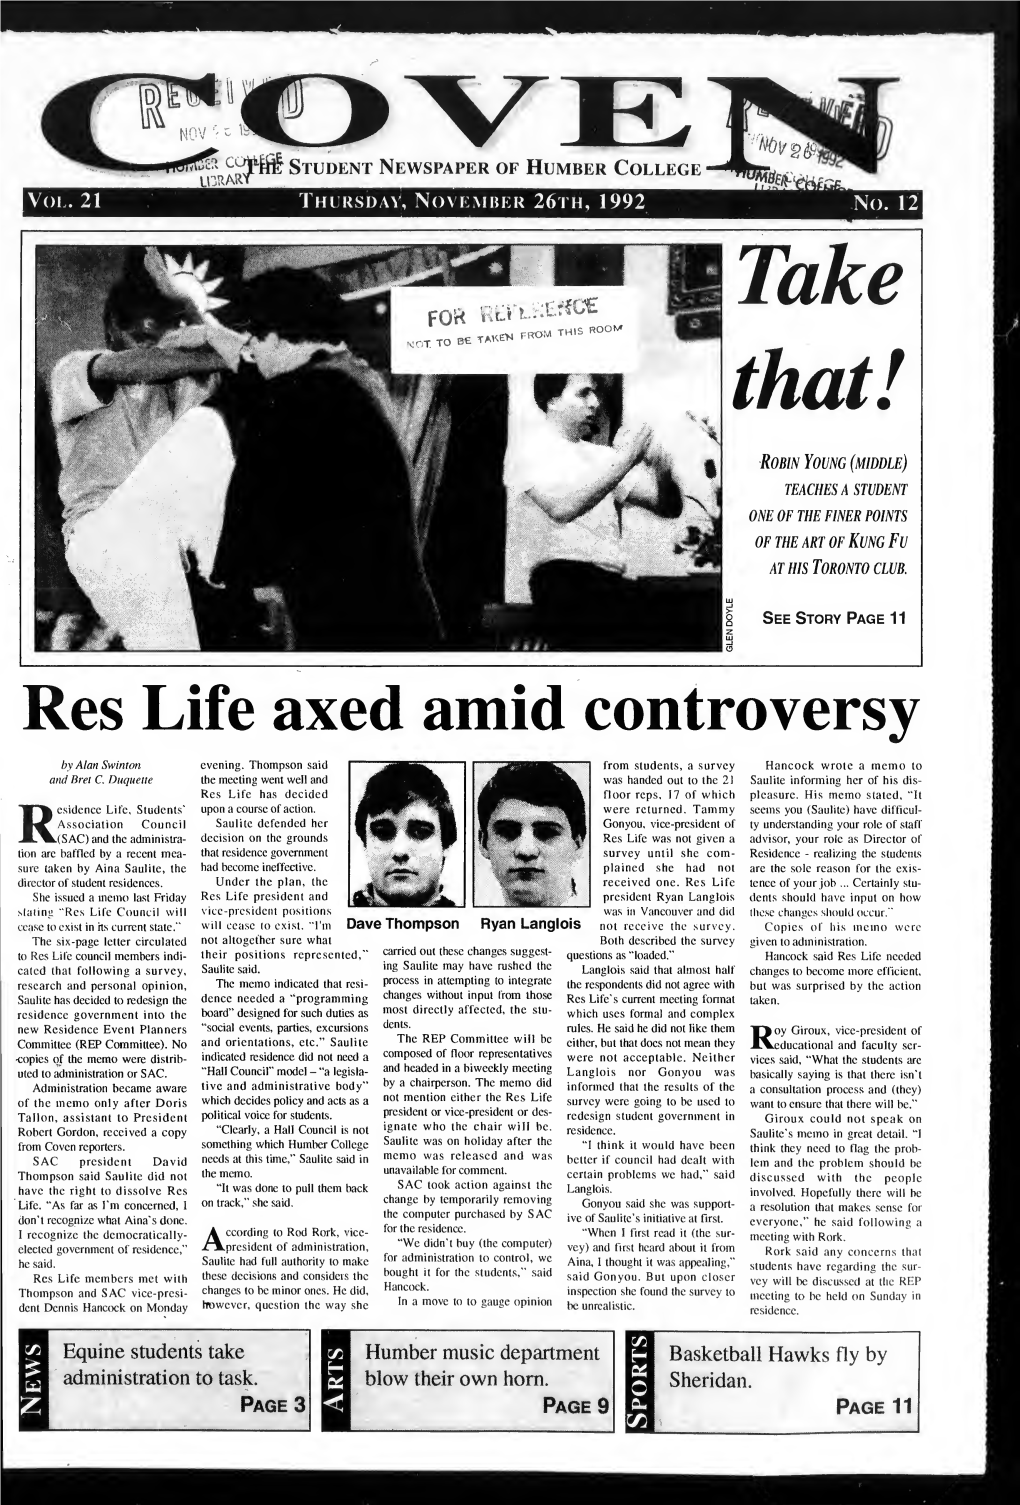 Res Life Axed Amid Controversy